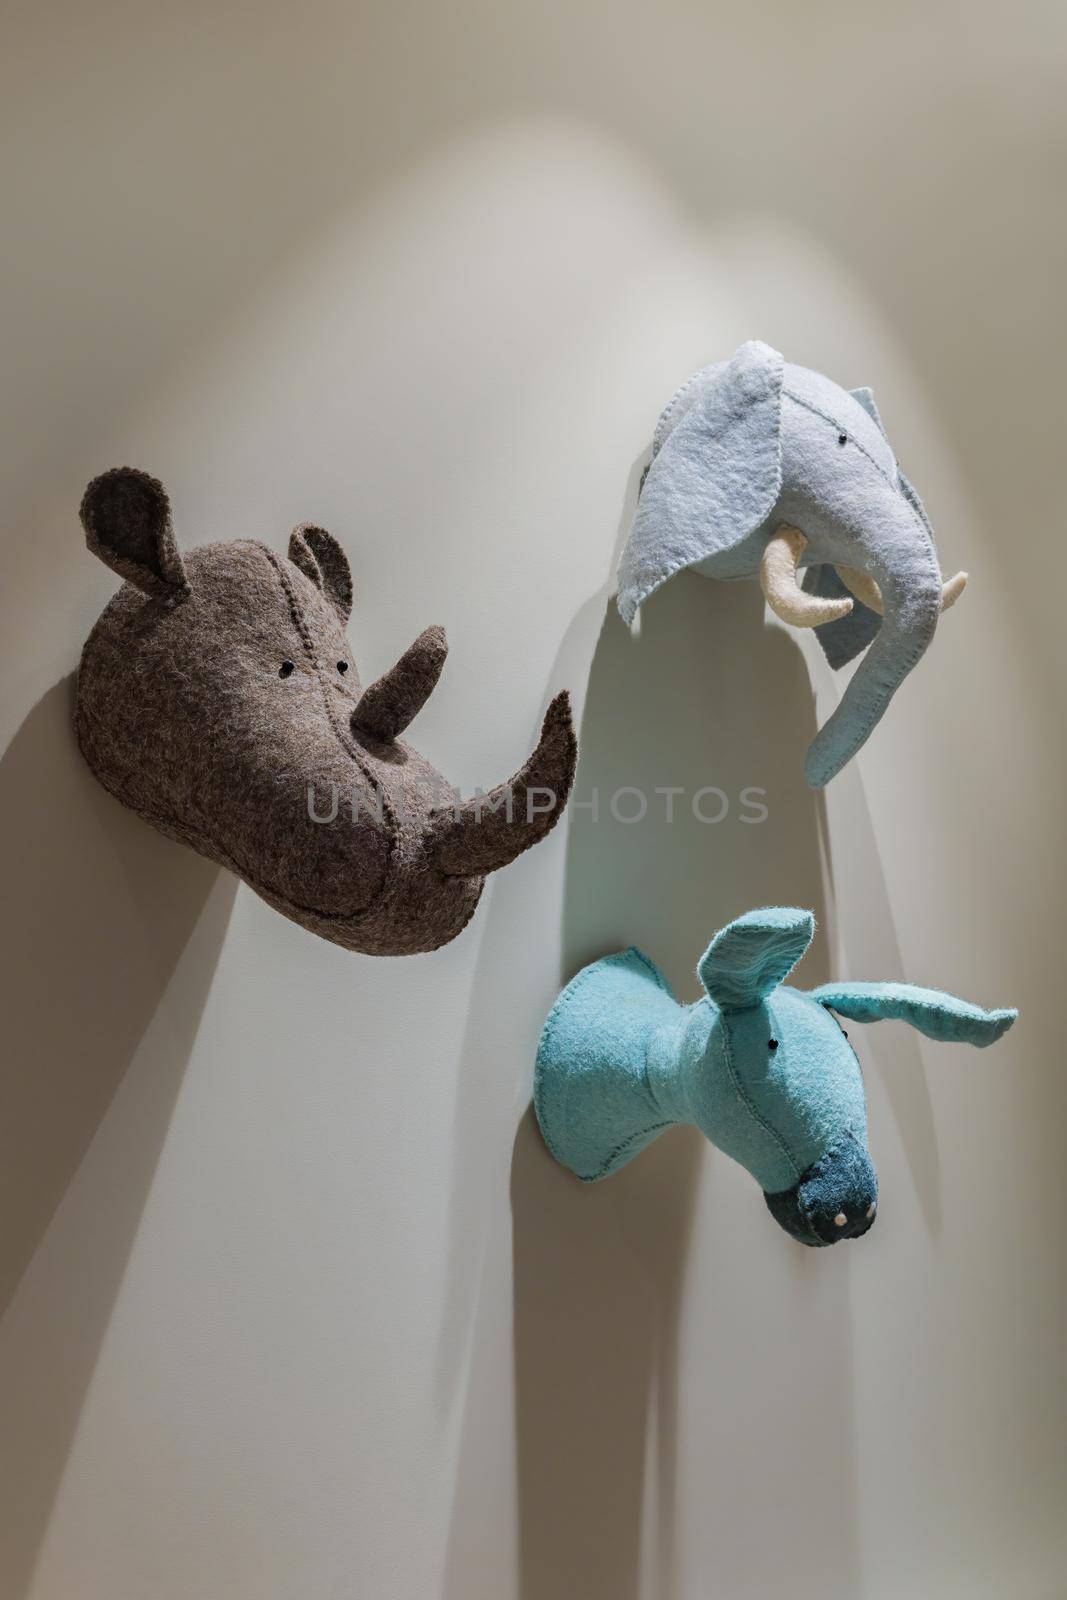 Felted animals toys hanging on the wall. Heads of donkey, rhinoceros and elephant on gray wall. Emulation of trophies from hunting in the children's room